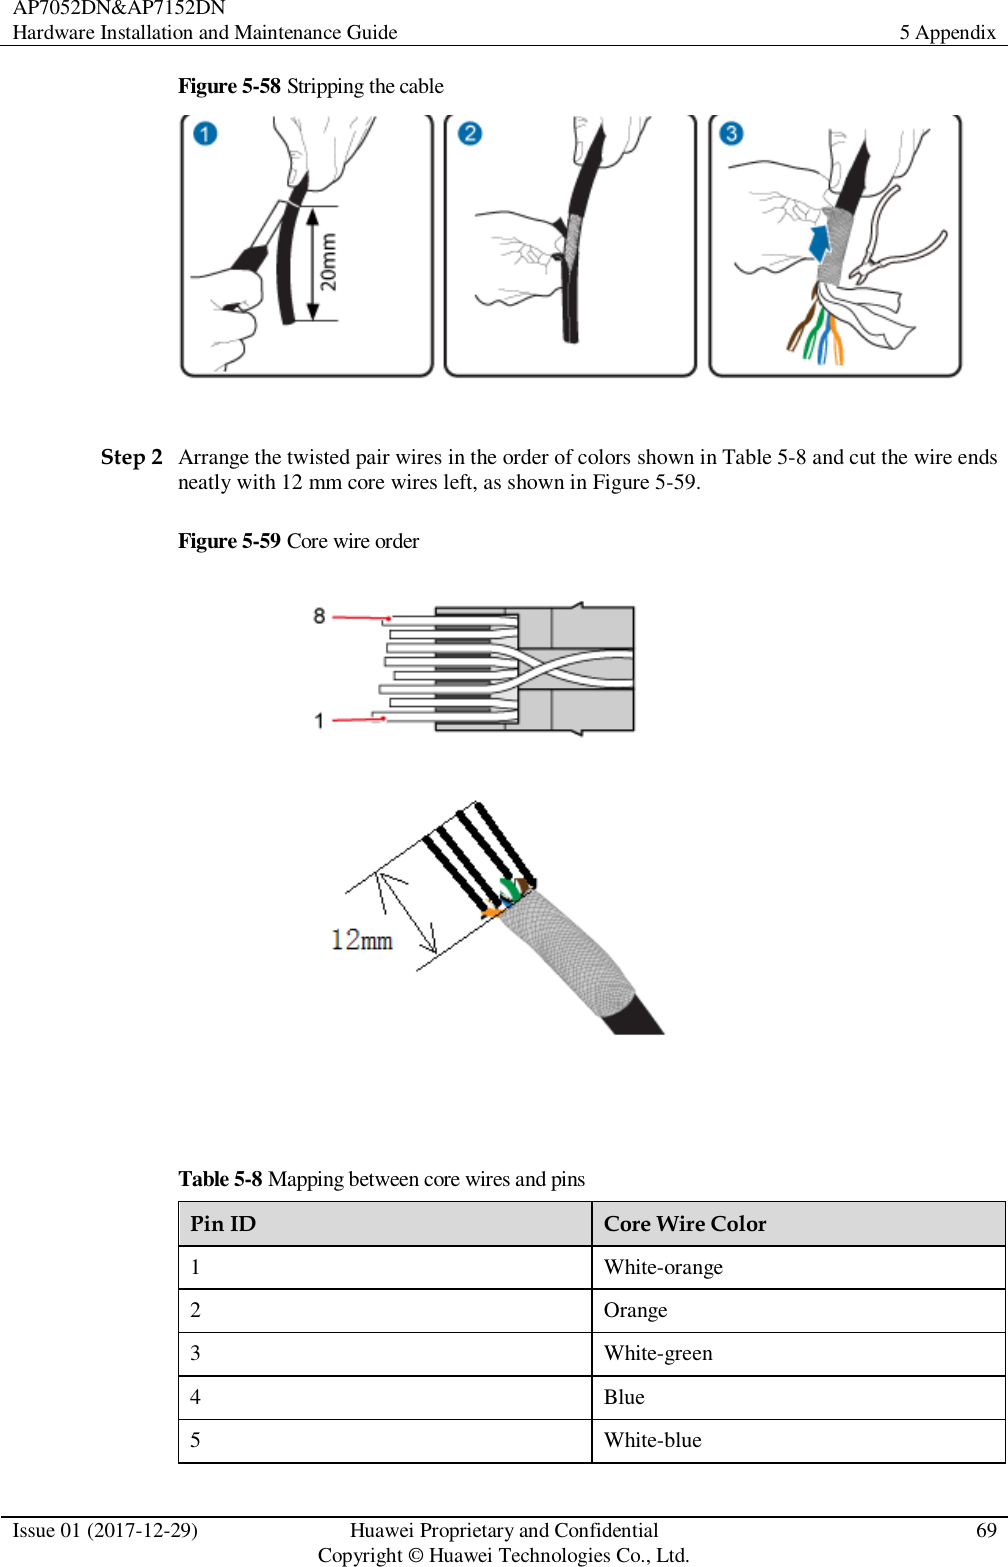 AP7052DN&amp;AP7152DN Hardware Installation and Maintenance Guide 5 Appendix  Issue 01 (2017-12-29) Huawei Proprietary and Confidential                                     Copyright © Huawei Technologies Co., Ltd. 69  Figure 5-58 Stripping the cable   Step 2 Arrange the twisted pair wires in the order of colors shown in Table 5-8 and cut the wire ends neatly with 12 mm core wires left, as shown in Figure 5-59. Figure 5-59 Core wire order   Table 5-8 Mapping between core wires and pins Pin ID Core Wire Color 1 White-orange 2 Orange 3 White-green 4 Blue 5 White-blue 